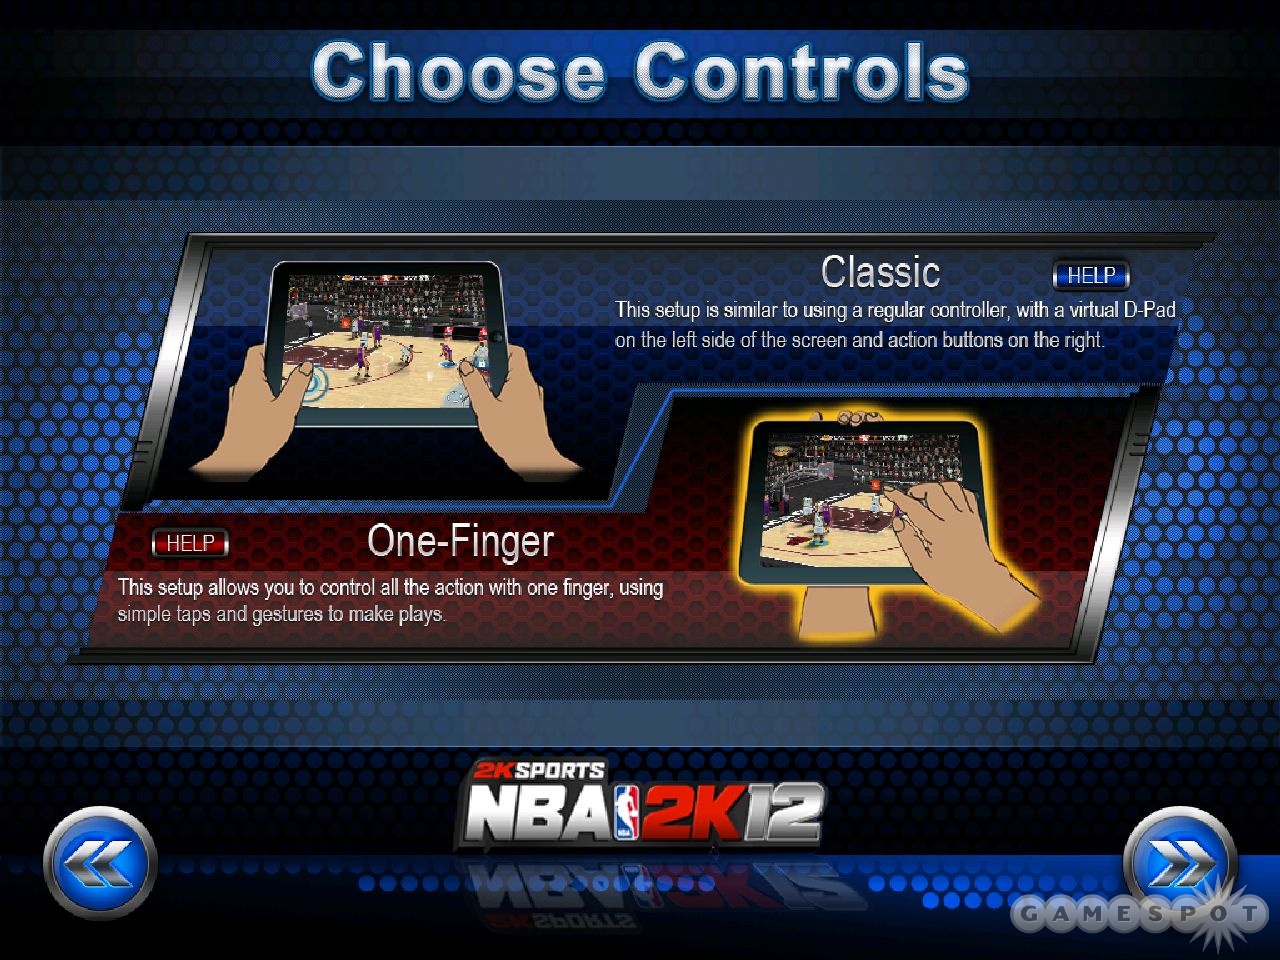 Your two control choices